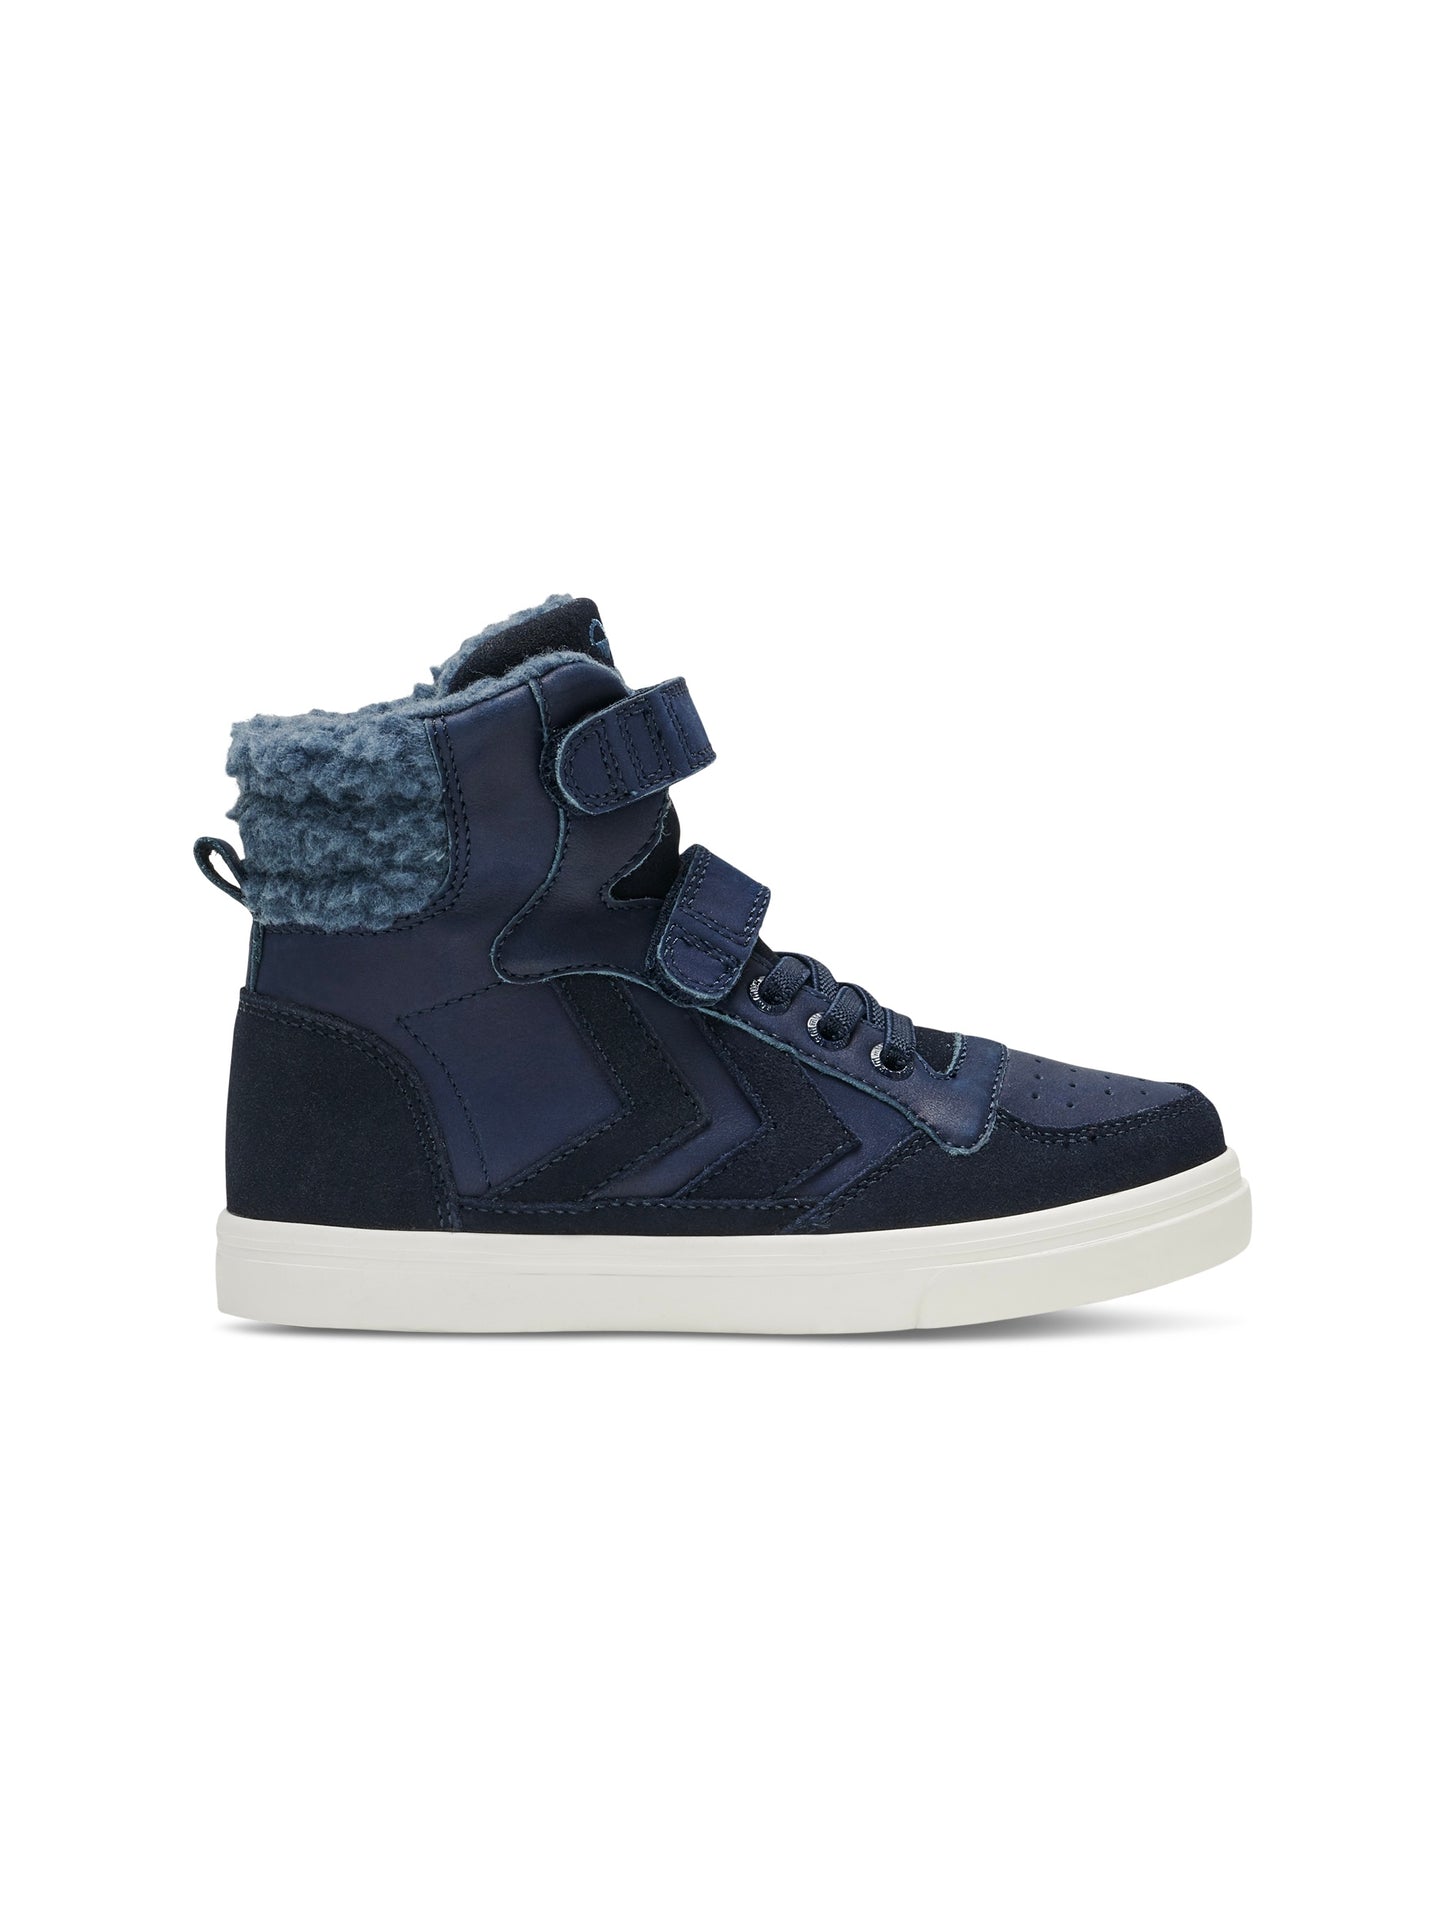 Hummel Stadil Winter Blue Leather Junior High top Trainers